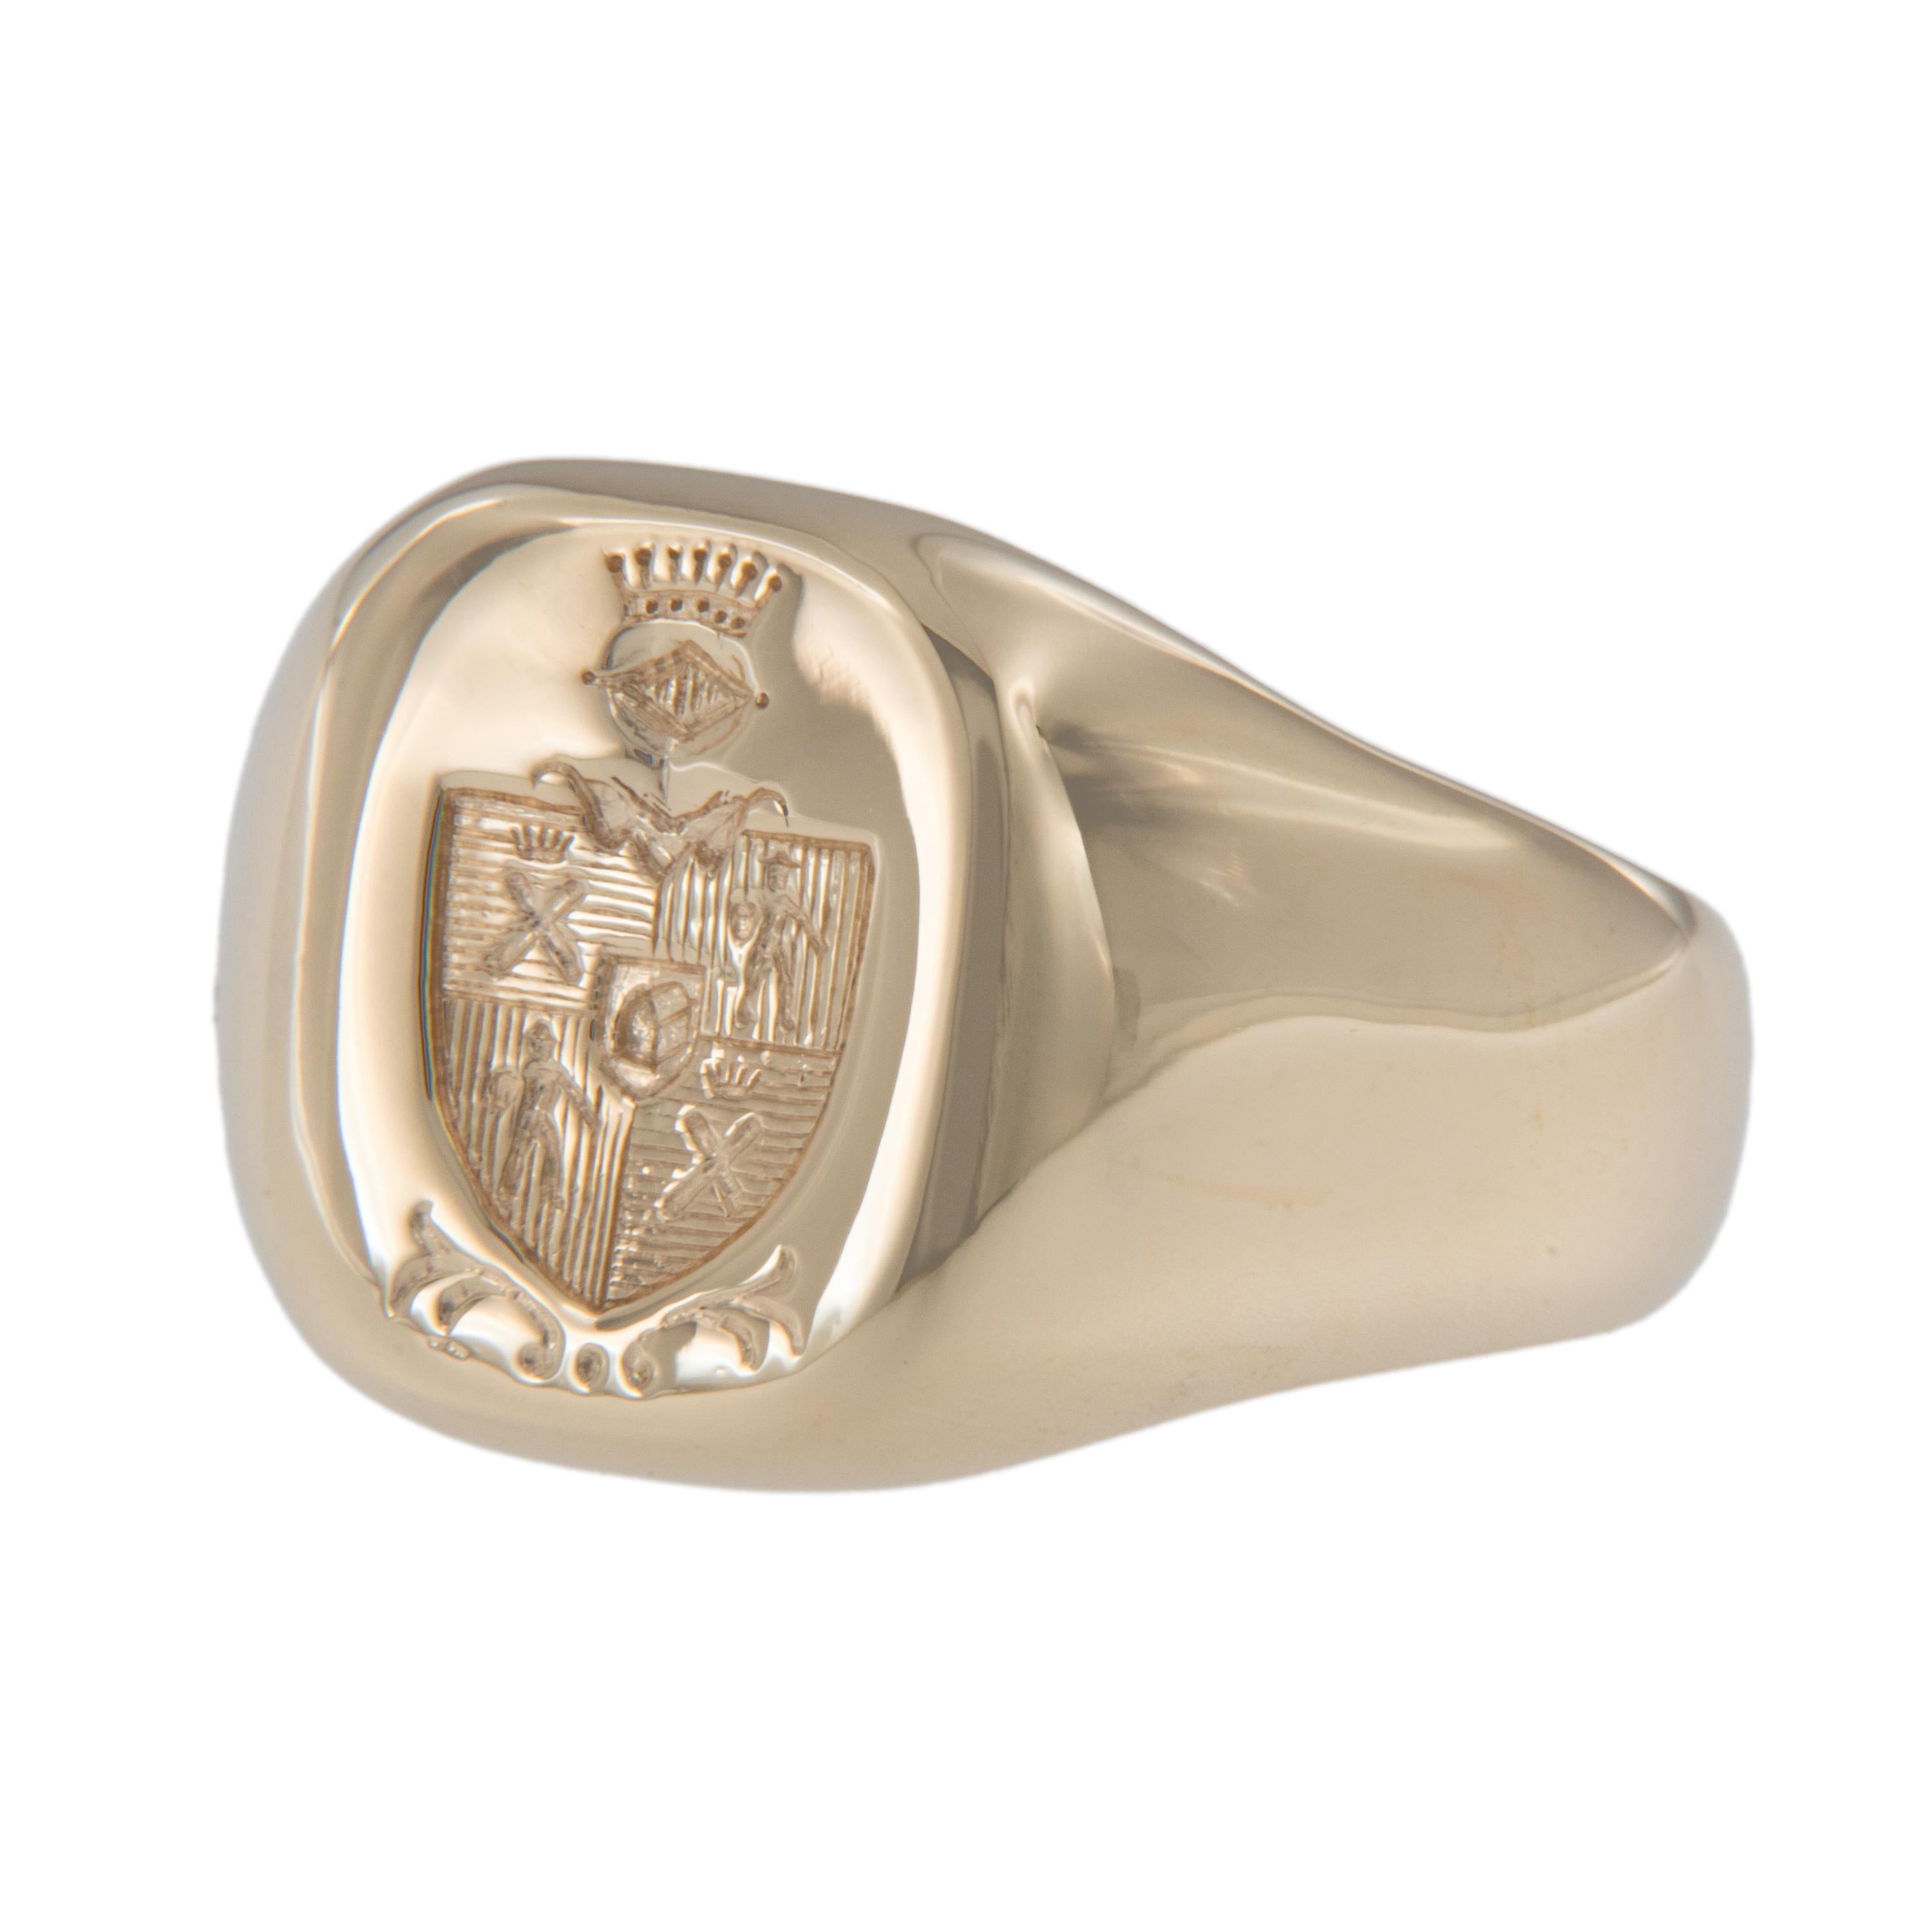 A signet ring can be represented by a smooth or engraved seal, or with an intaglio, which is created by carving into the surface of a stone. Its purpose would have been to seal the wax of a letter or note. This superb 14 karat yellow gold Tiffany &